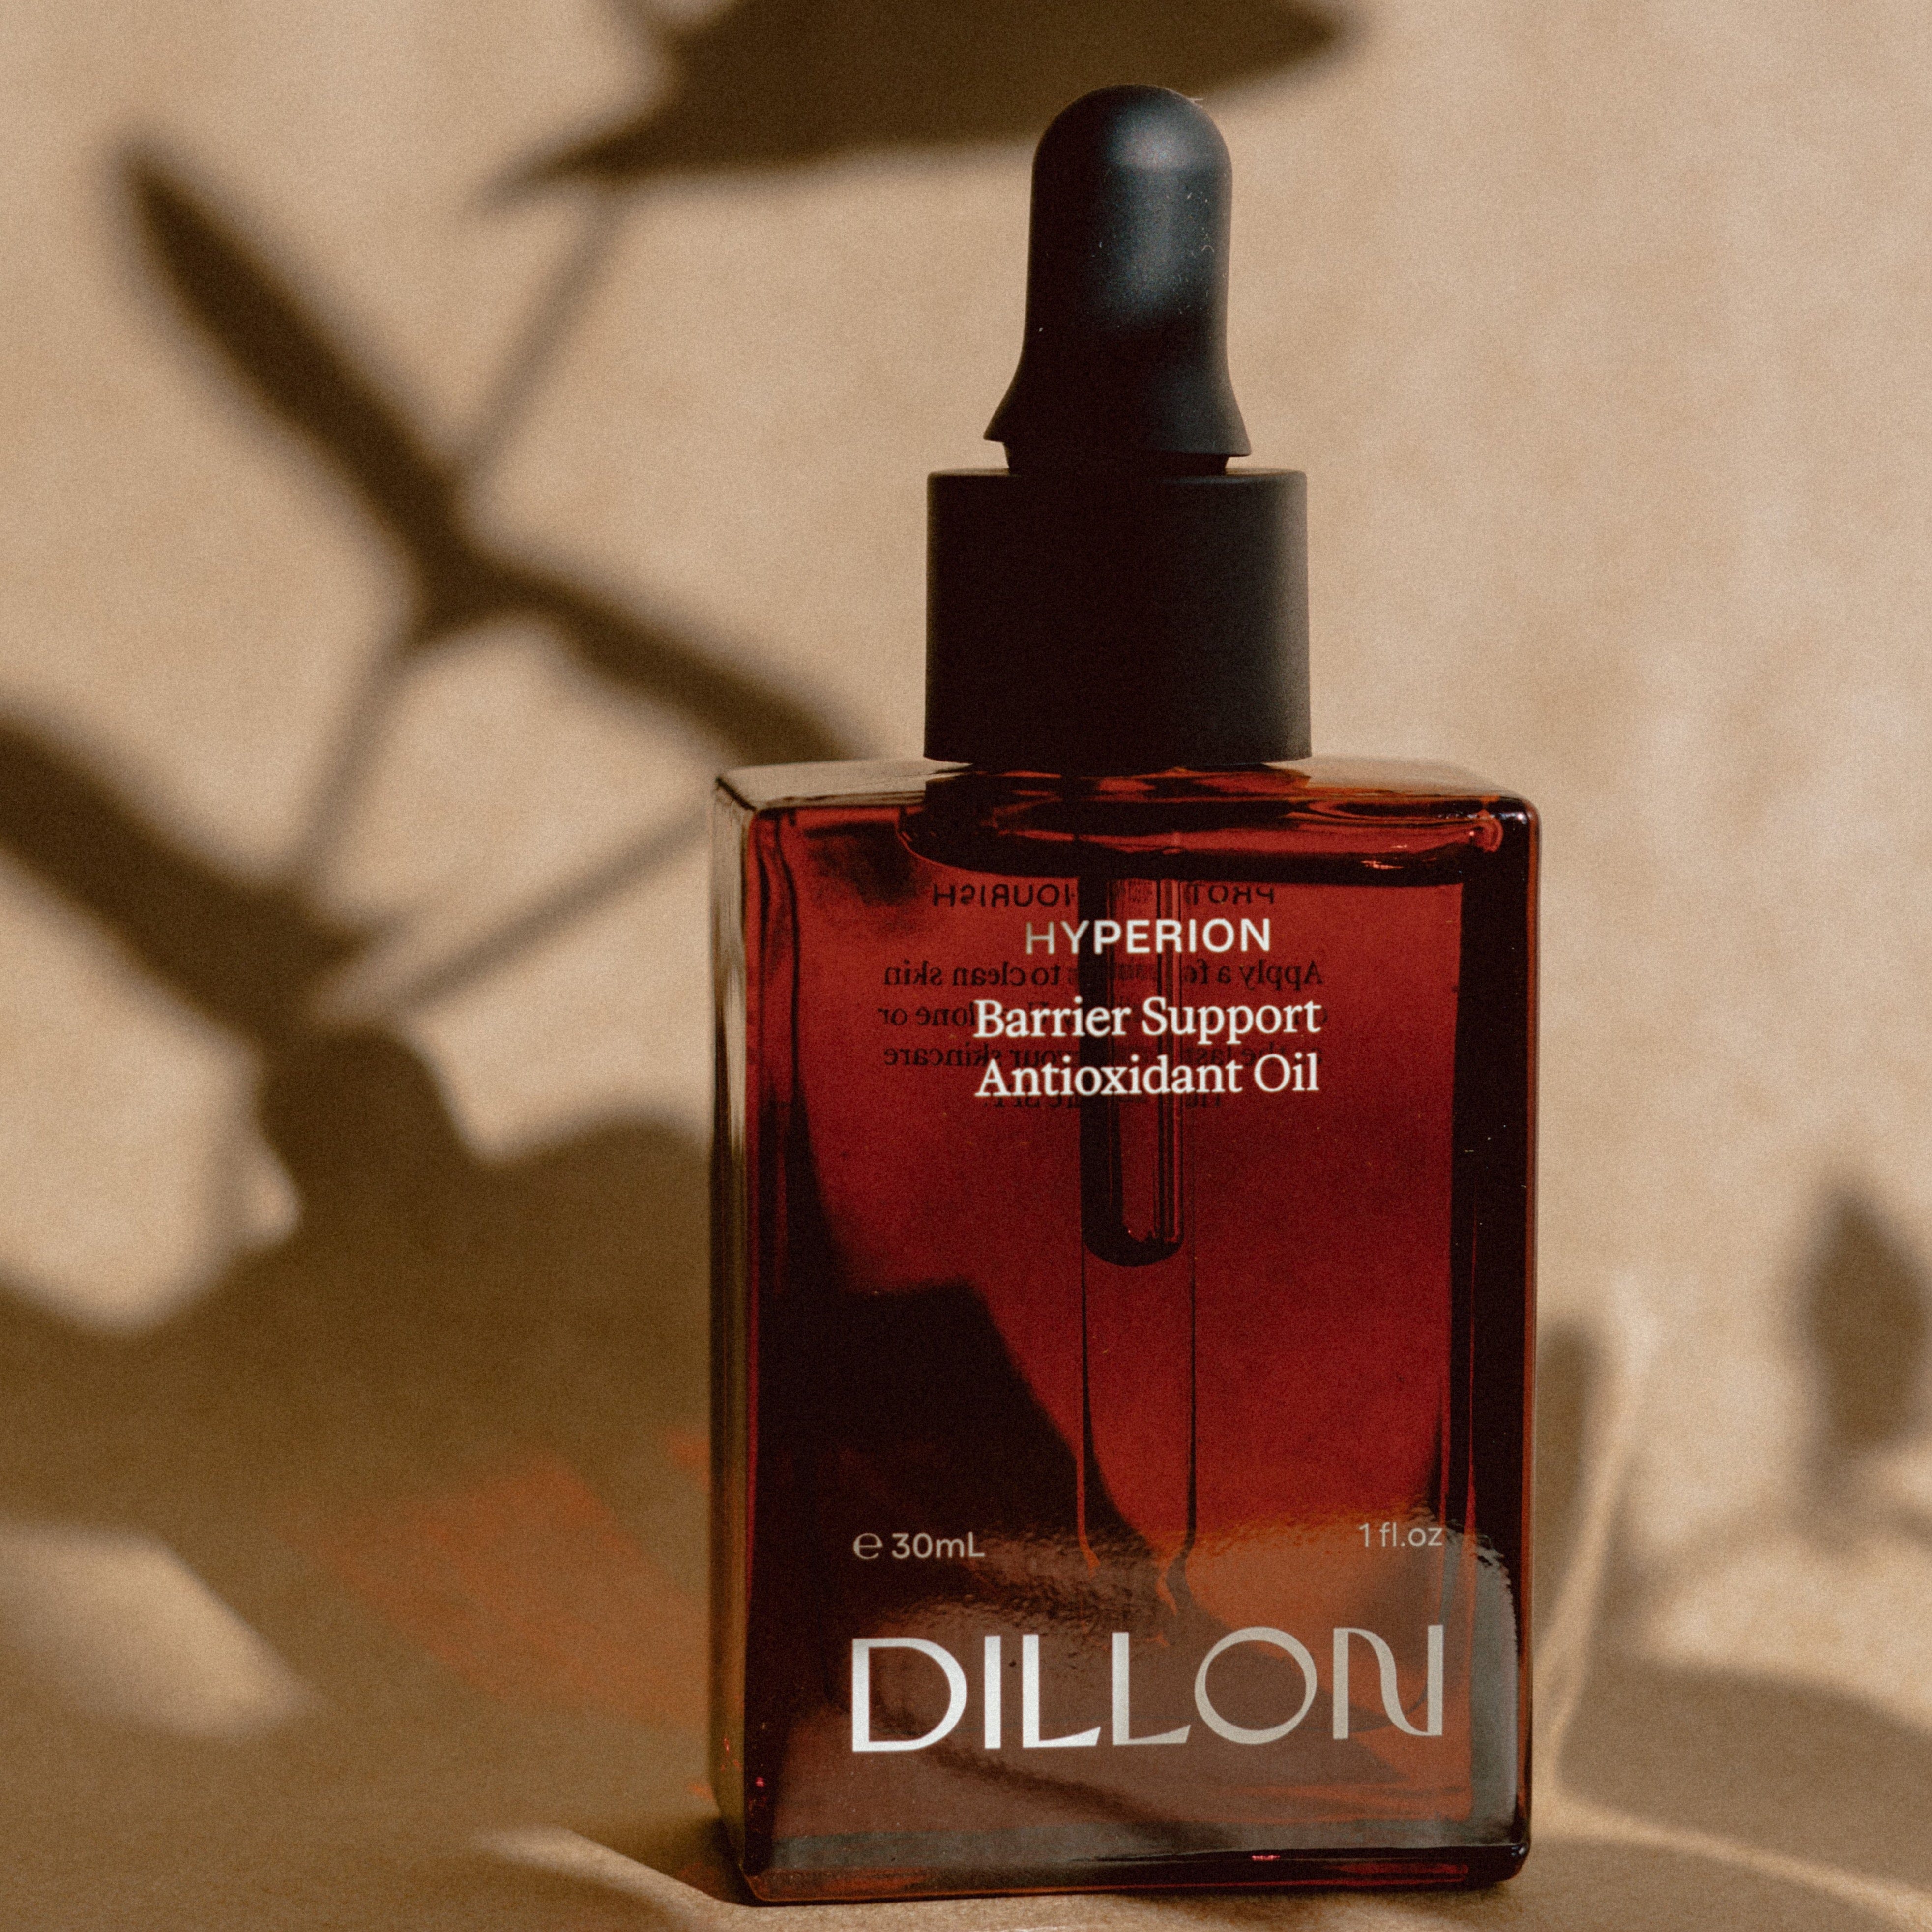 Hyperion Barrier Support Antioxidant Oil by DILLON